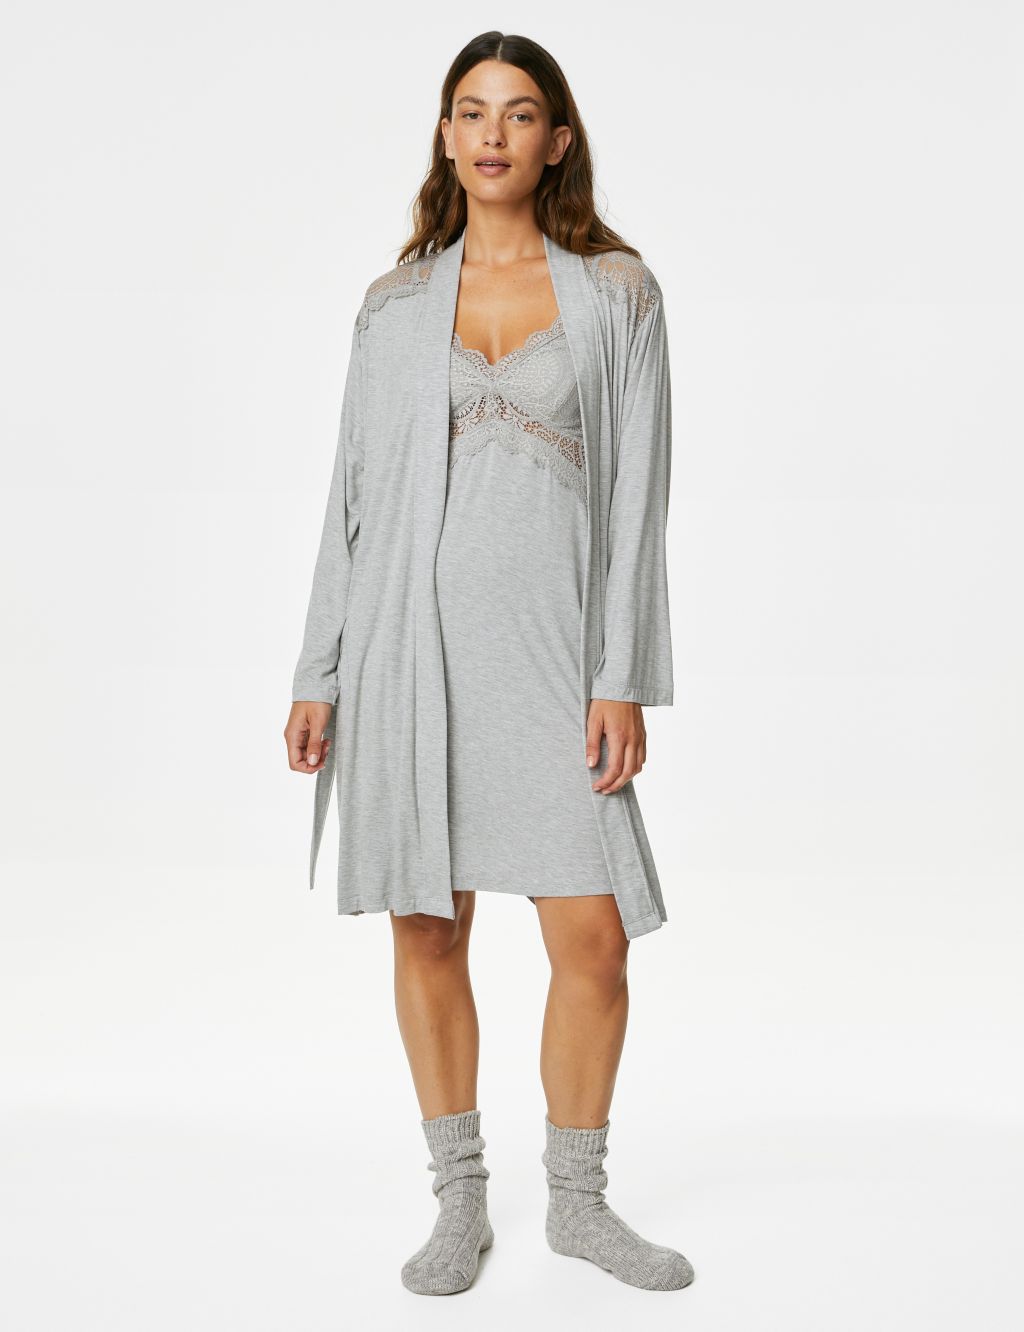 Body Soft™ Lace Detail Short Dressing Gown image 3